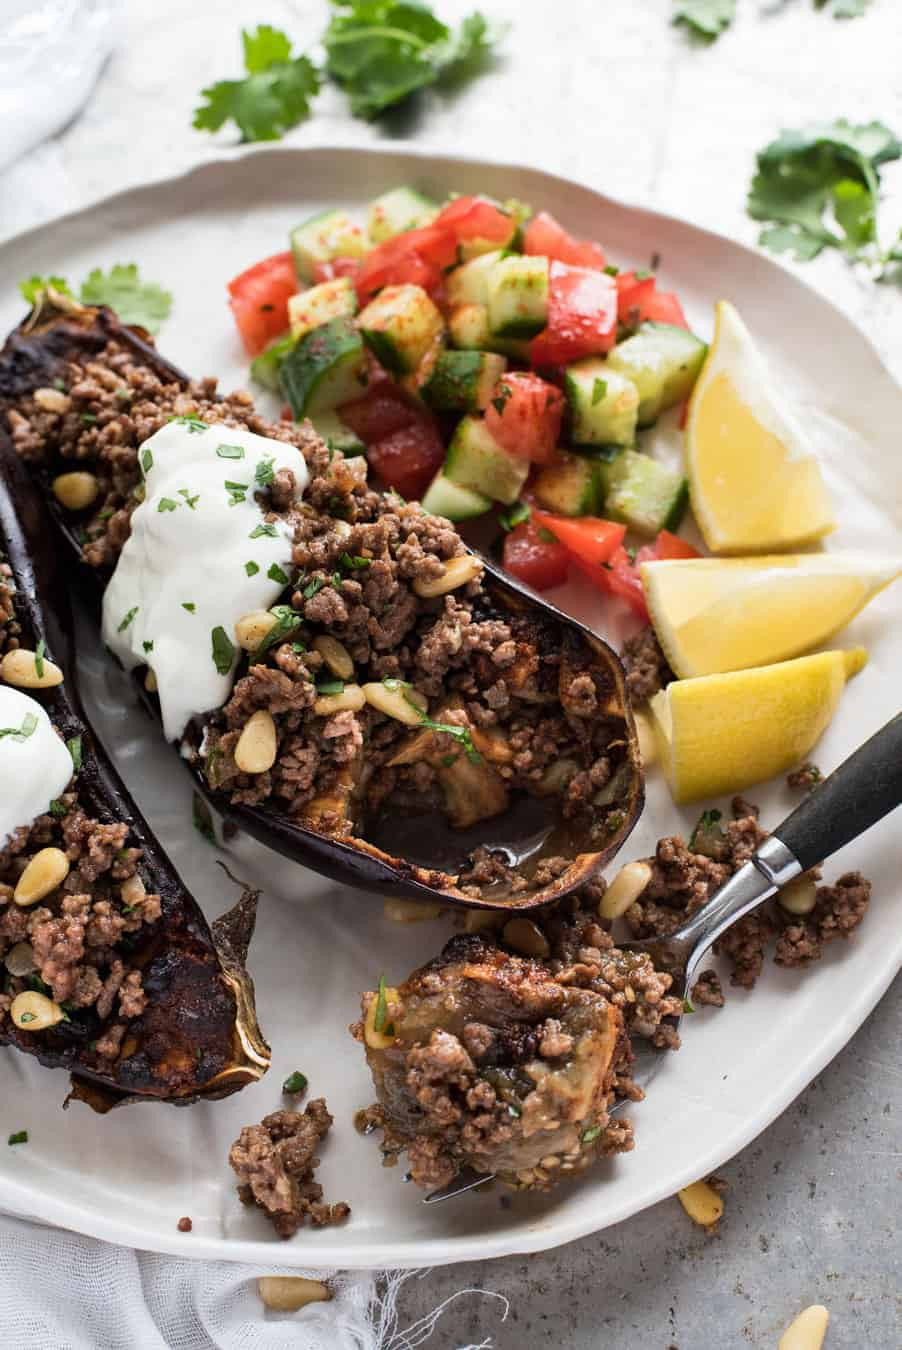 Middle Eastern Ground Beef Recipes
 Moroccan Baked Eggplant with Beef